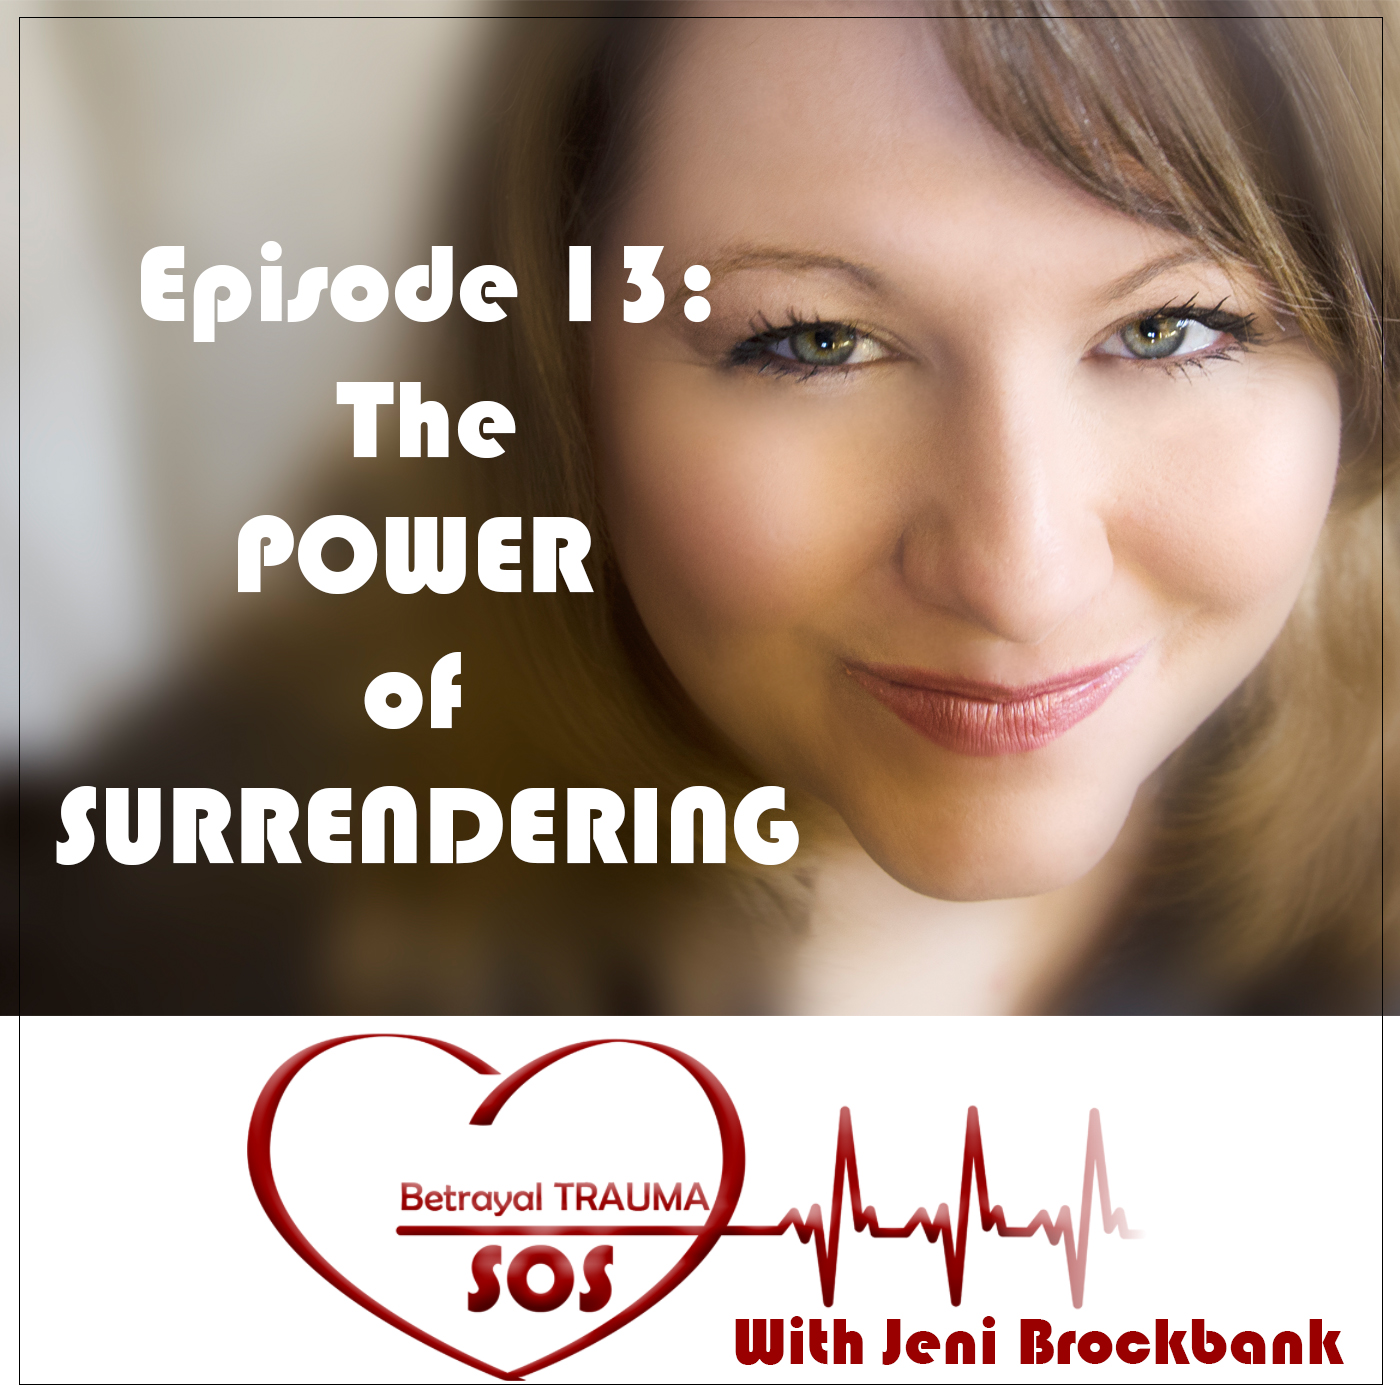 Episode 13: The POWER of SURRENDERING